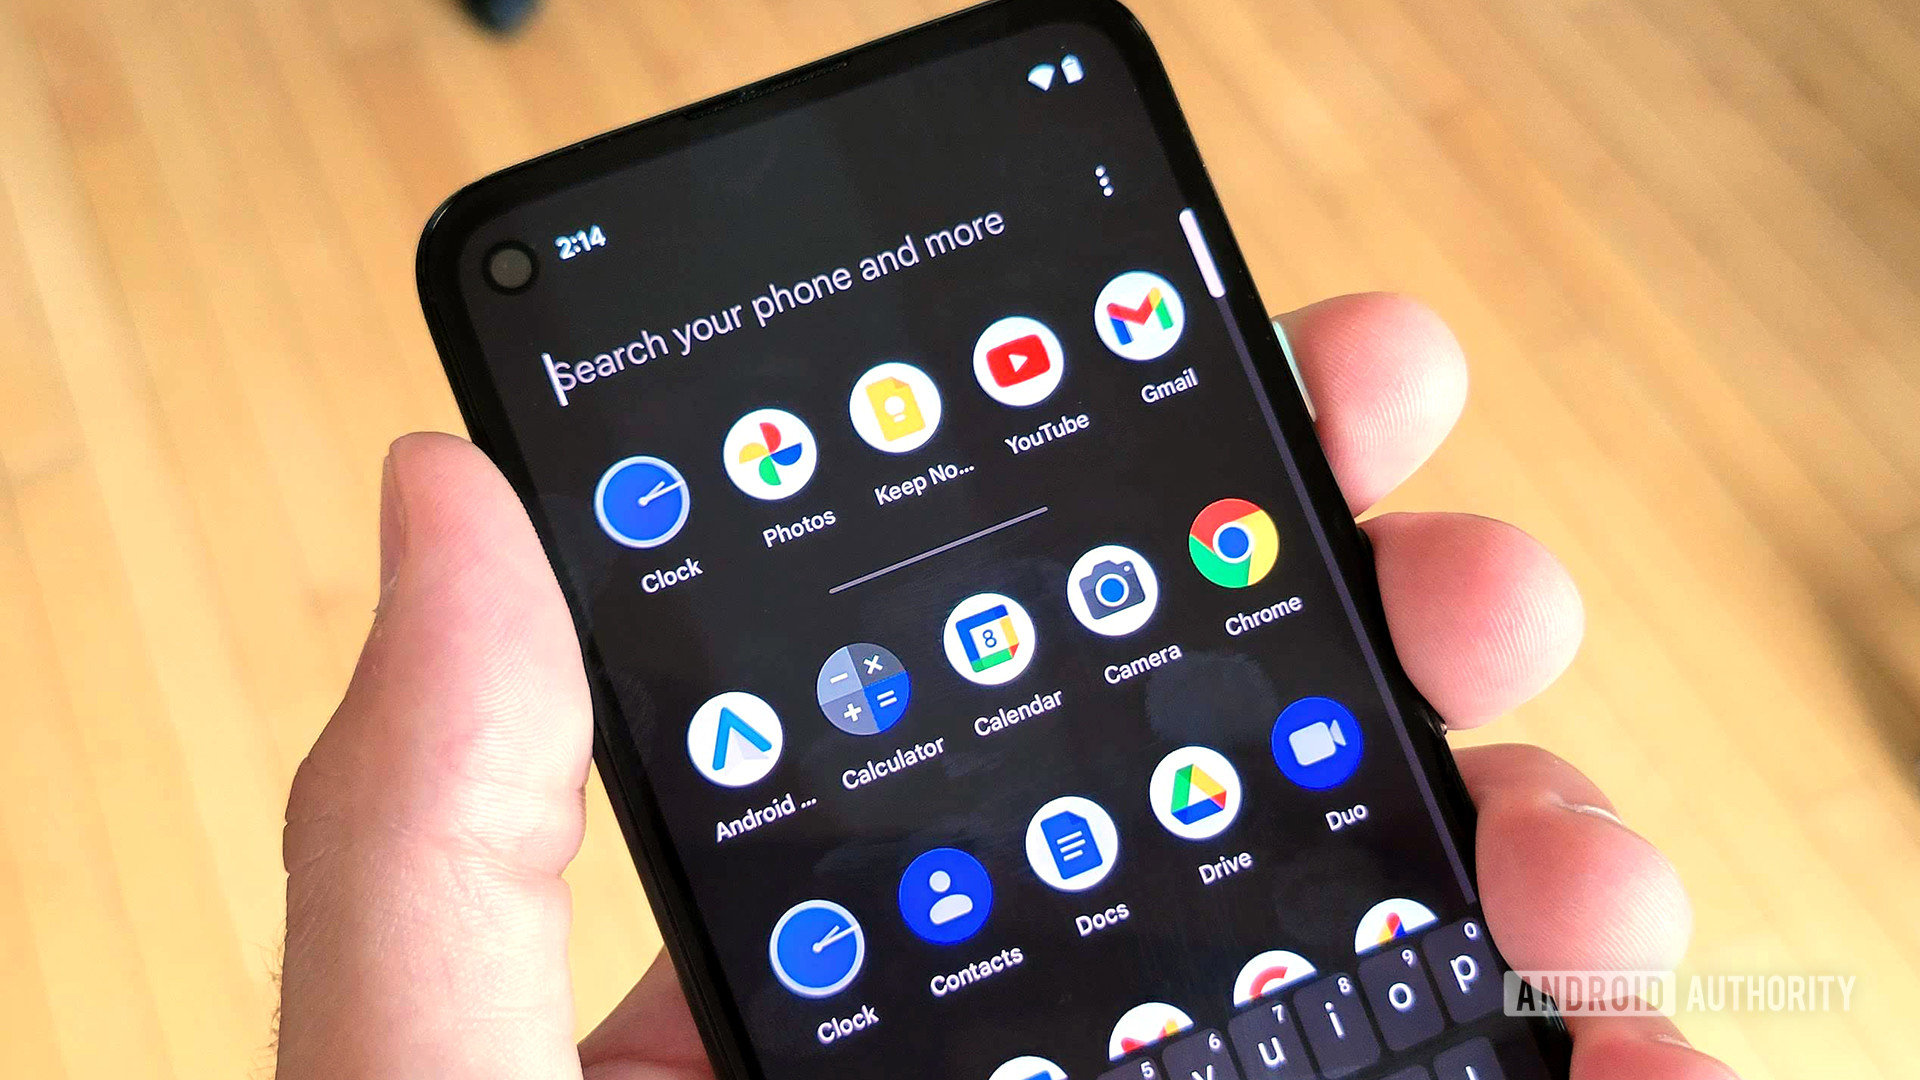 Android 12 beta 5 finally brings the promised full device search feature